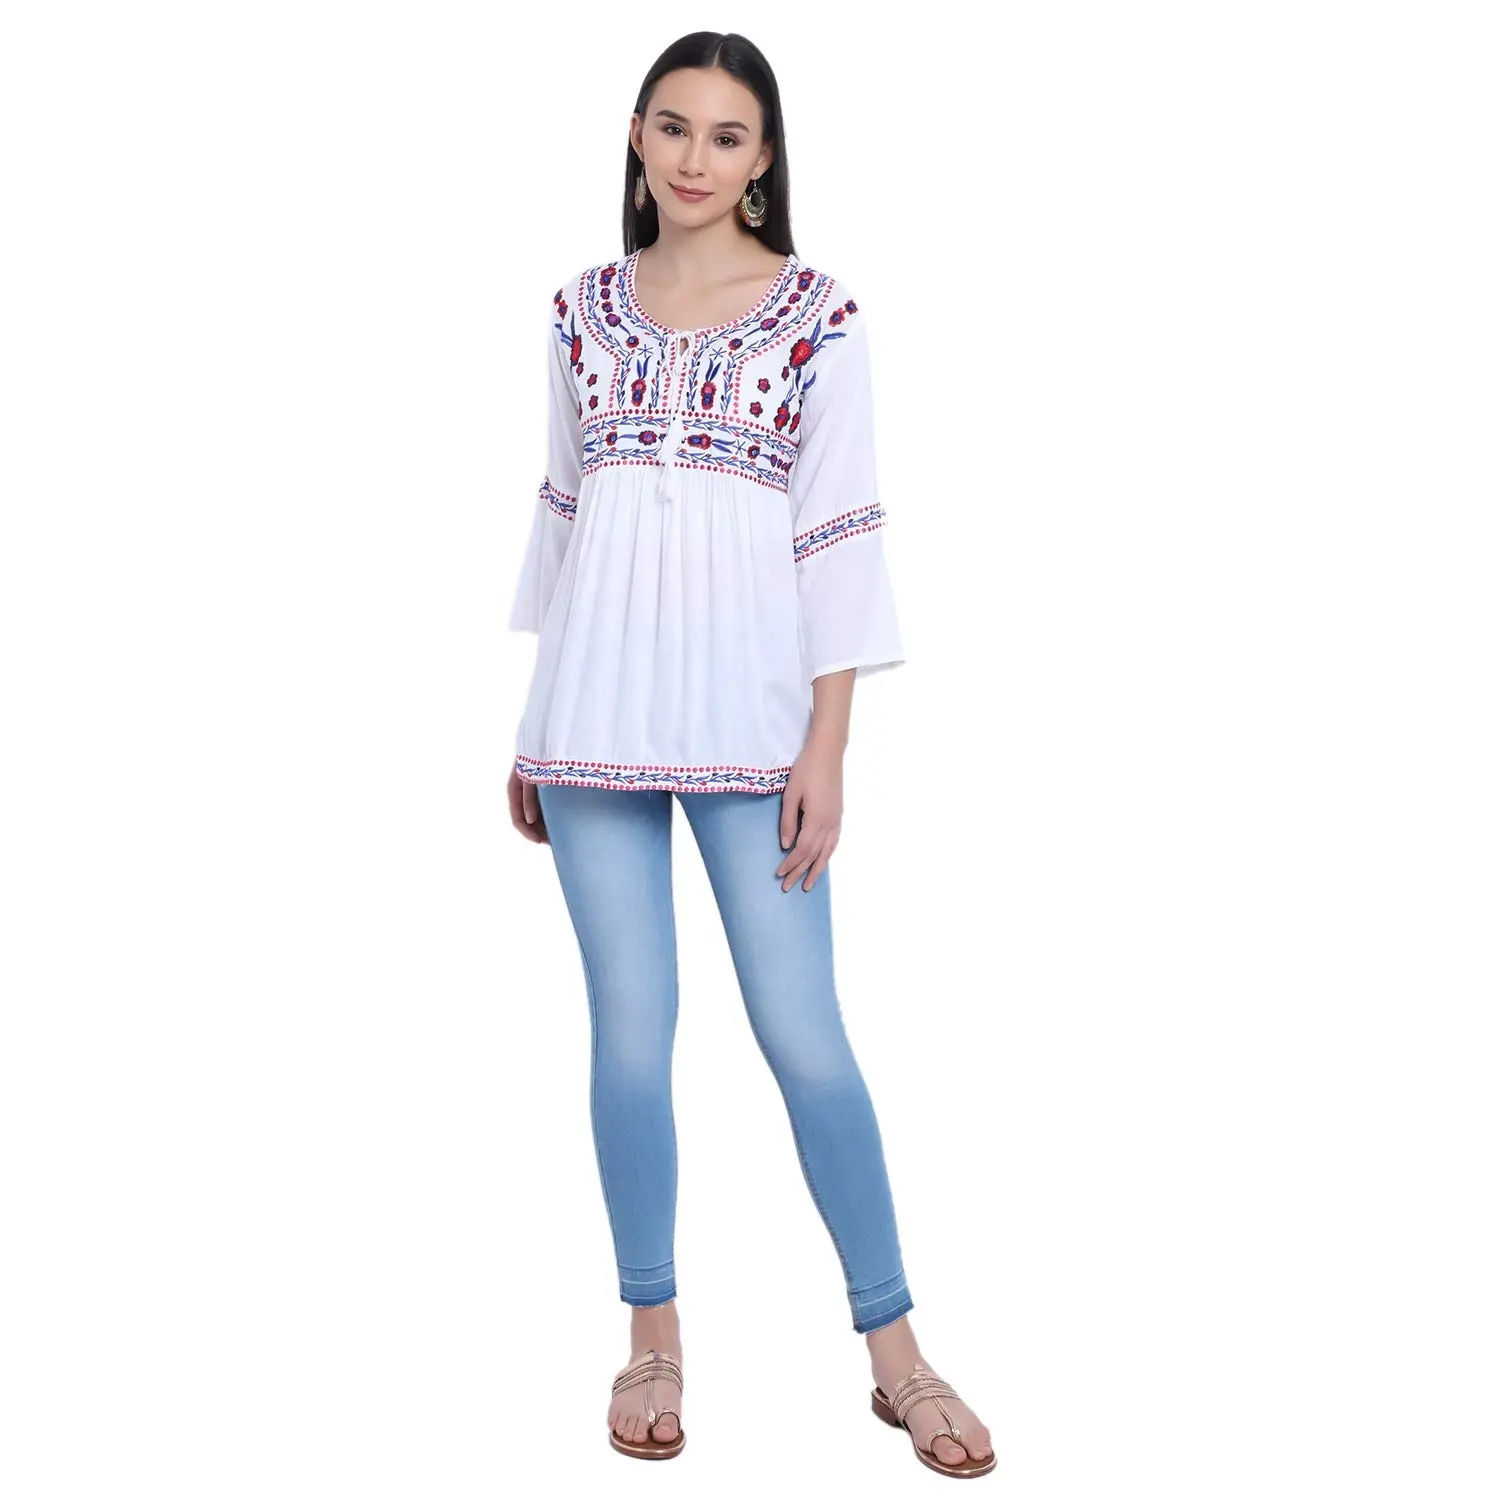 Women's u Neck Chiffon Casual Tunic Top and Blouse Formal Office Wear Ethnic Embroidered Tunic Tops.